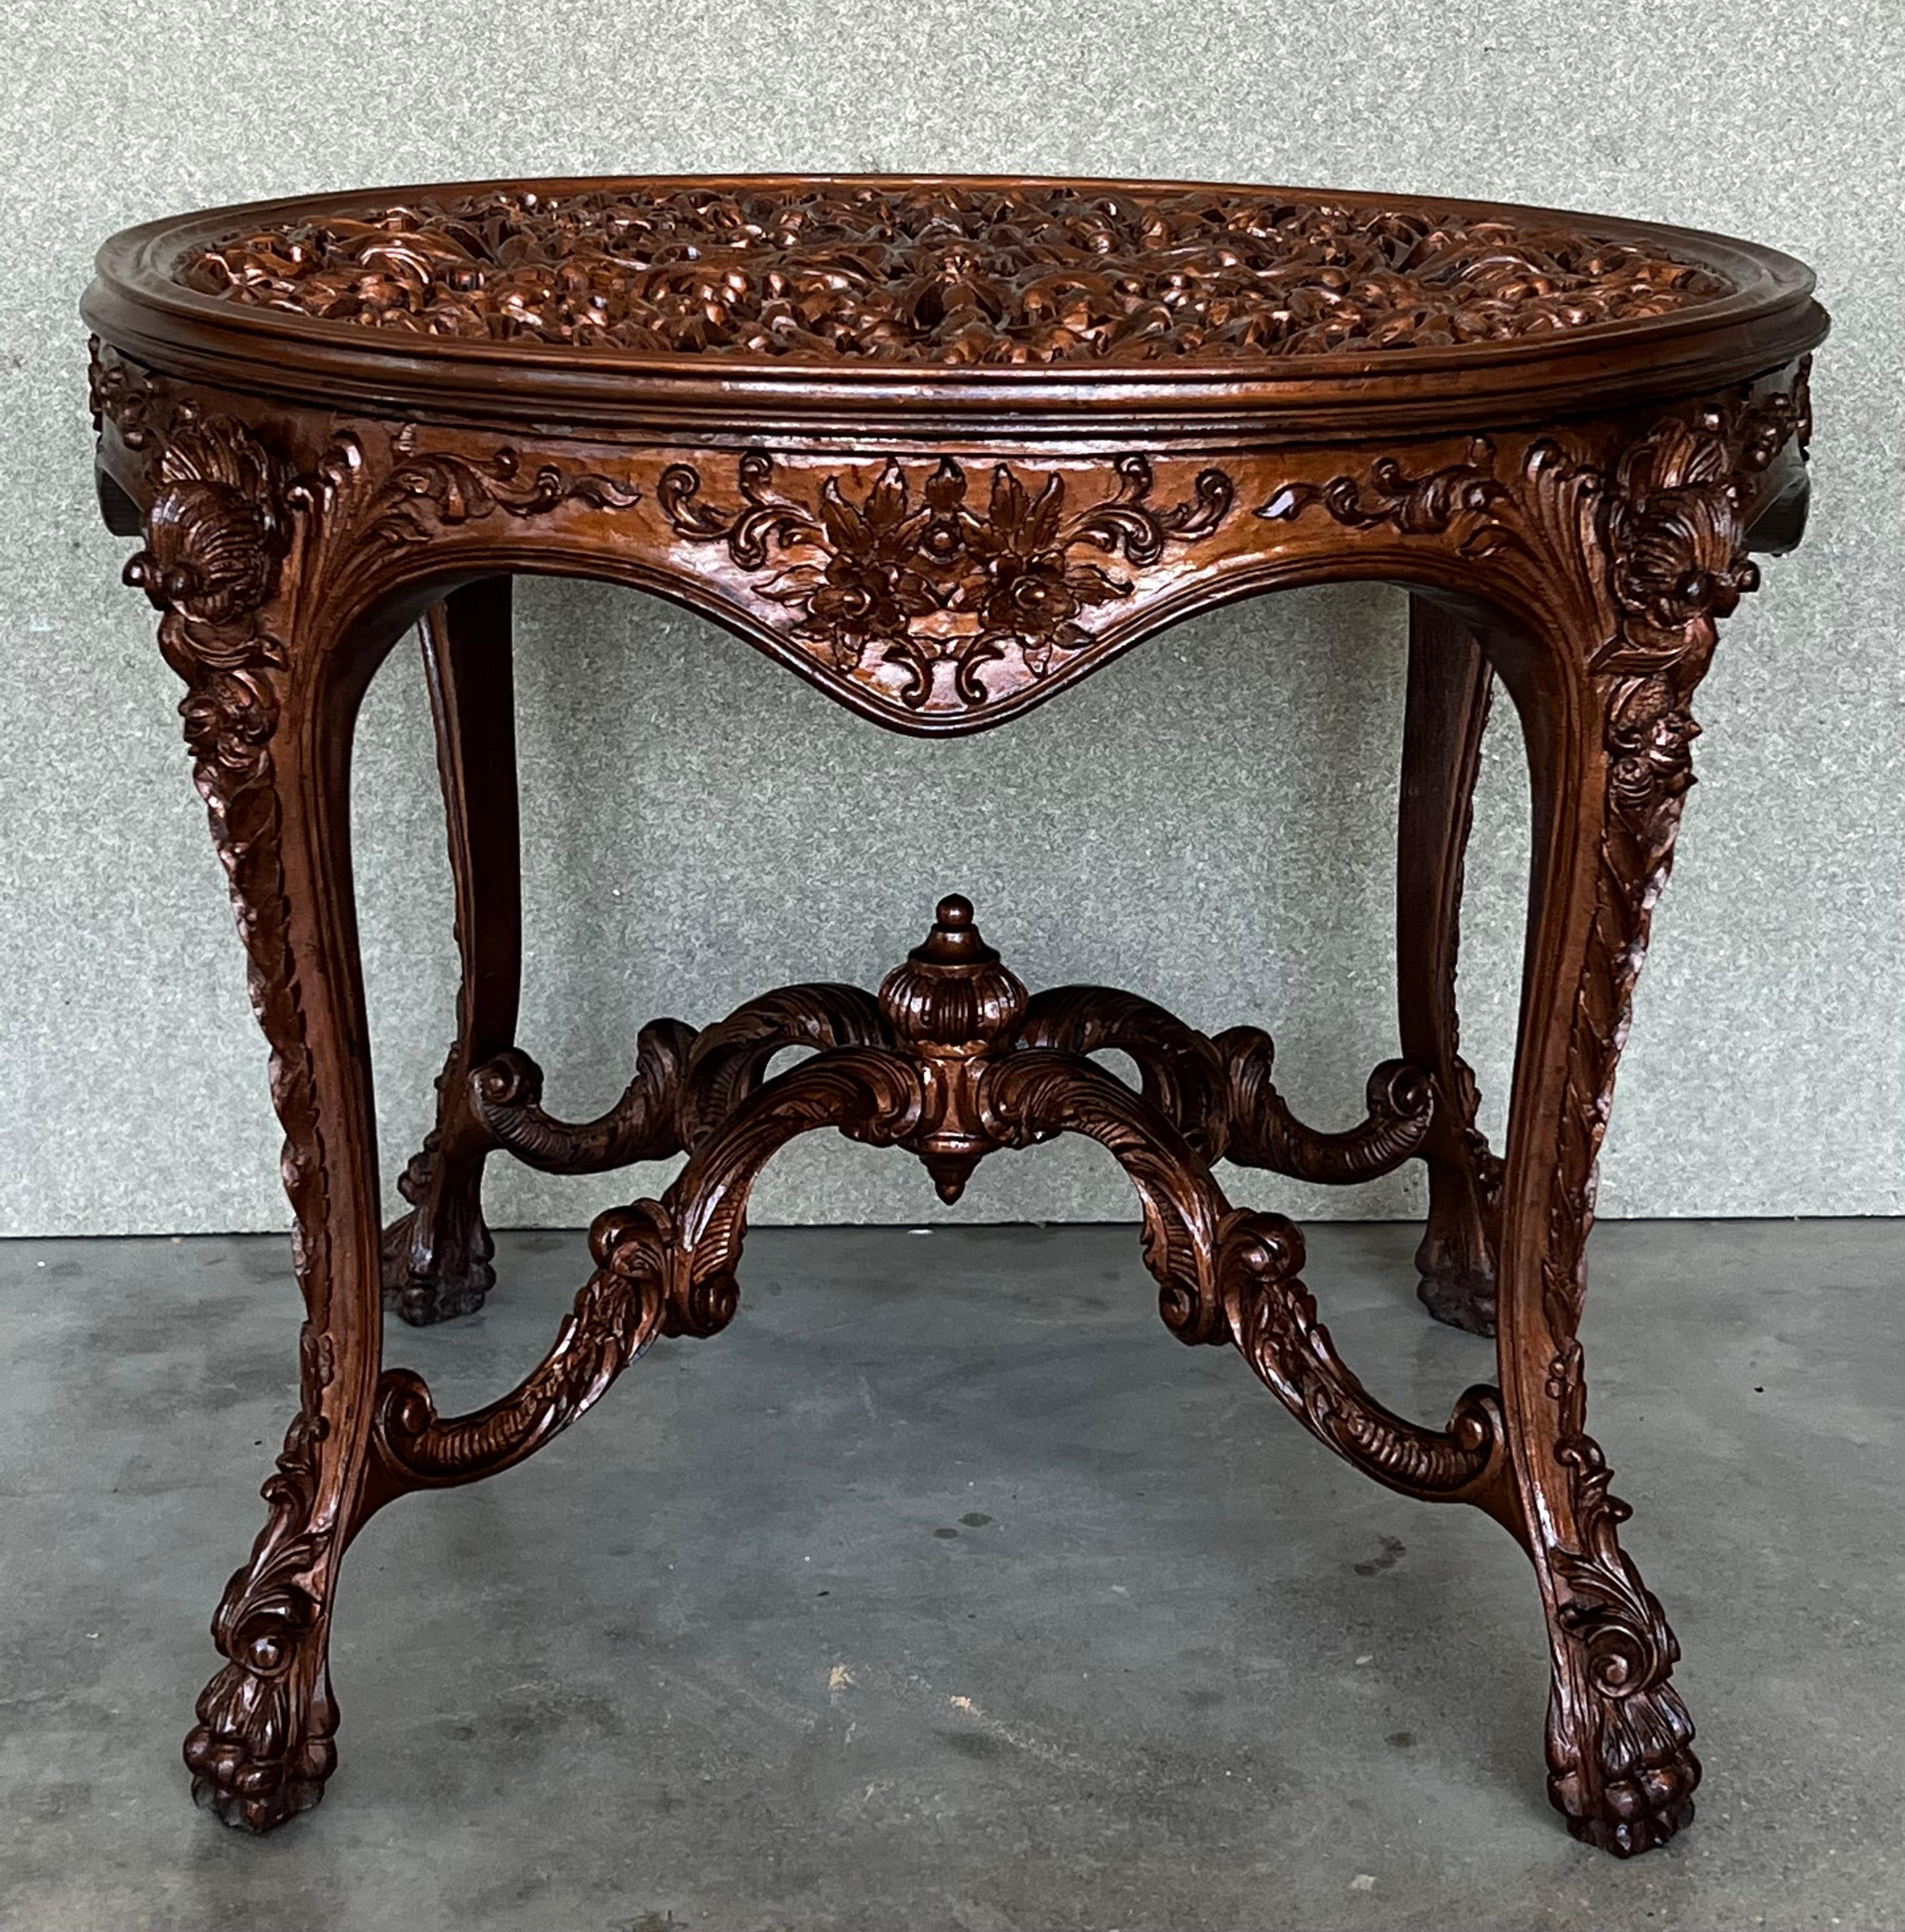 20th Mariano Garcia Spanish Side Table with Highly Carved Top and Legs In Good Condition For Sale In Miami, FL